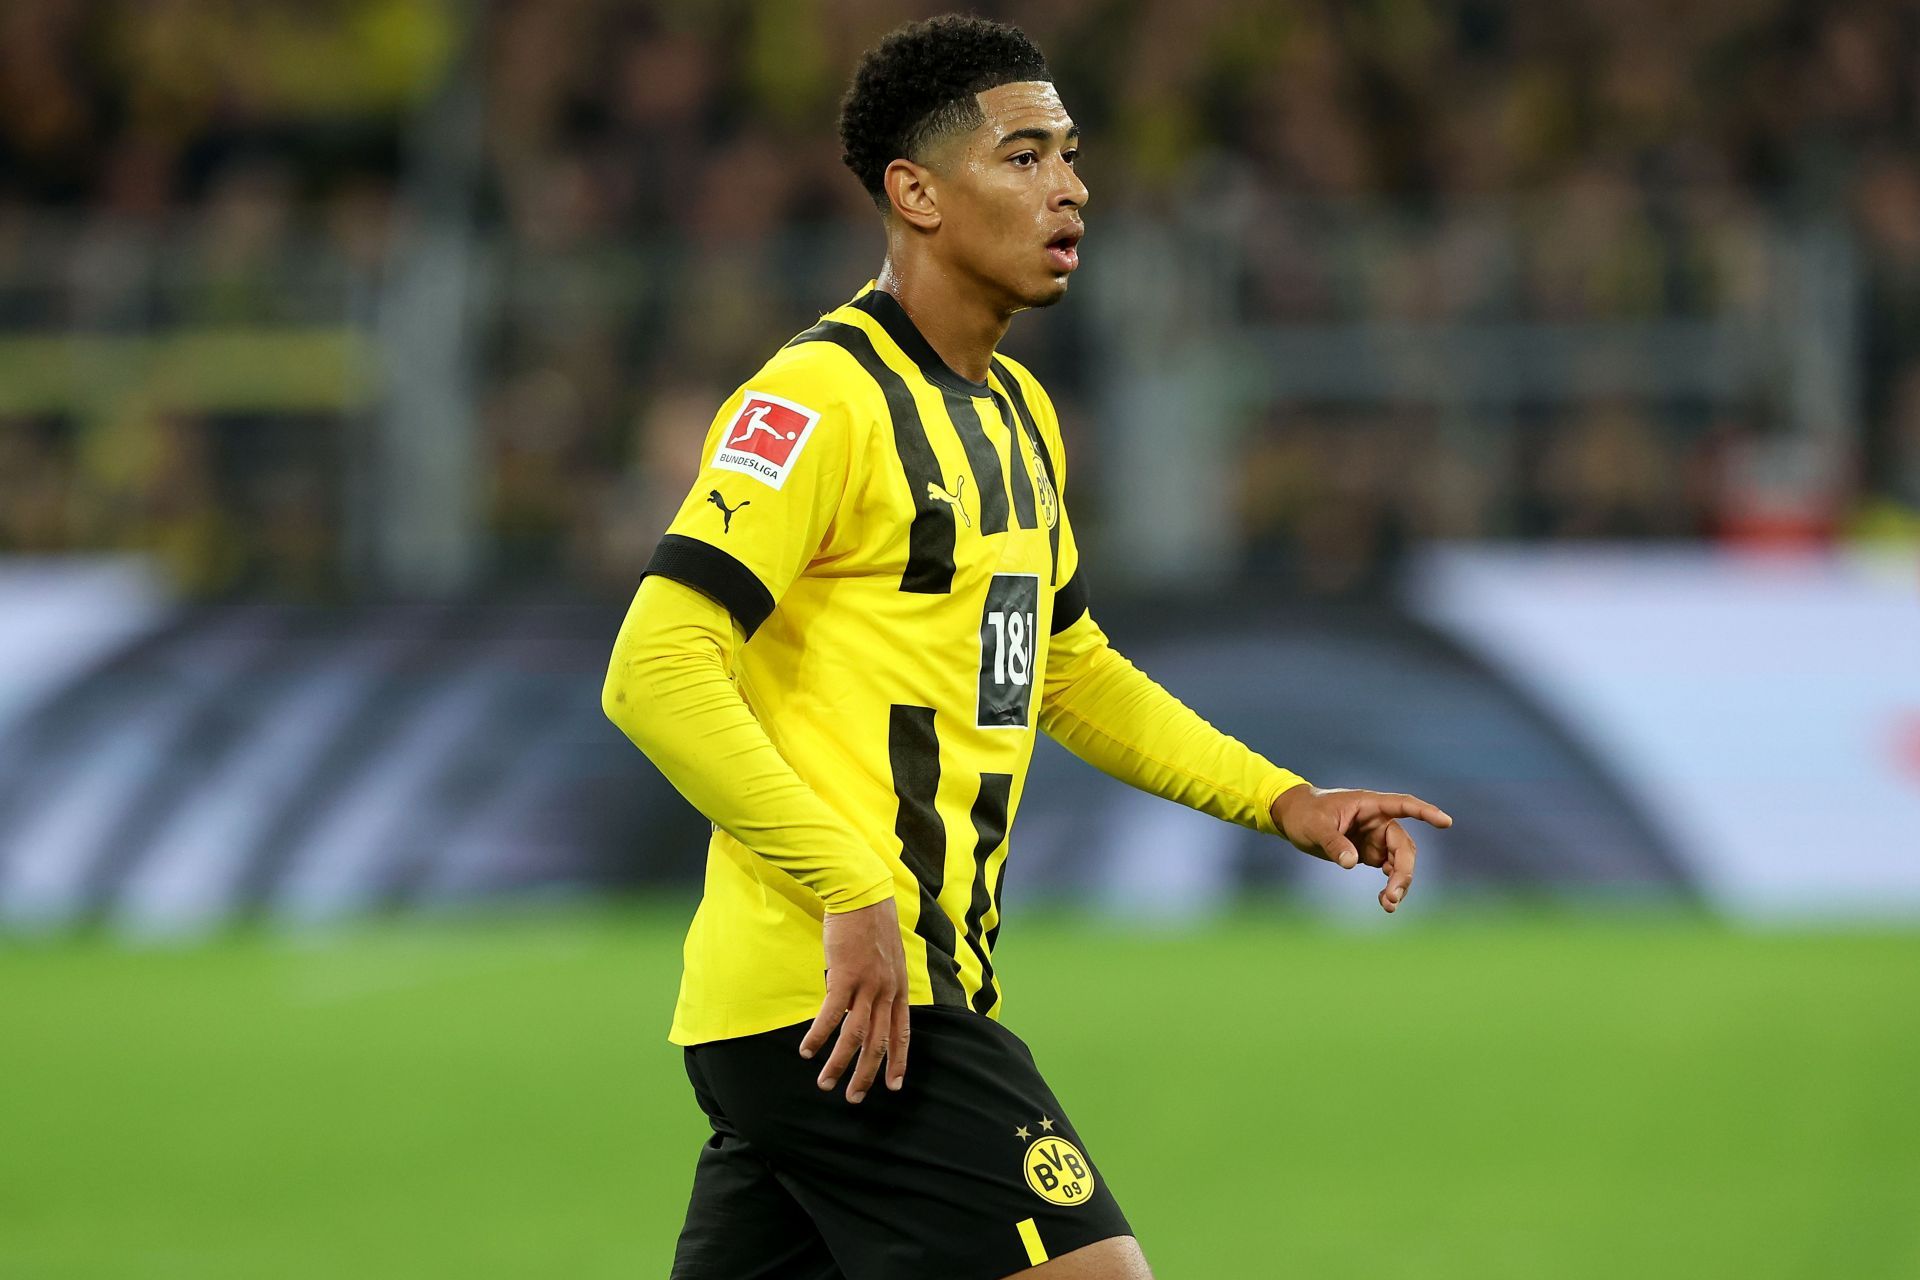 The Borussia Dortmund midfielder continues to attract interest from top clubs.